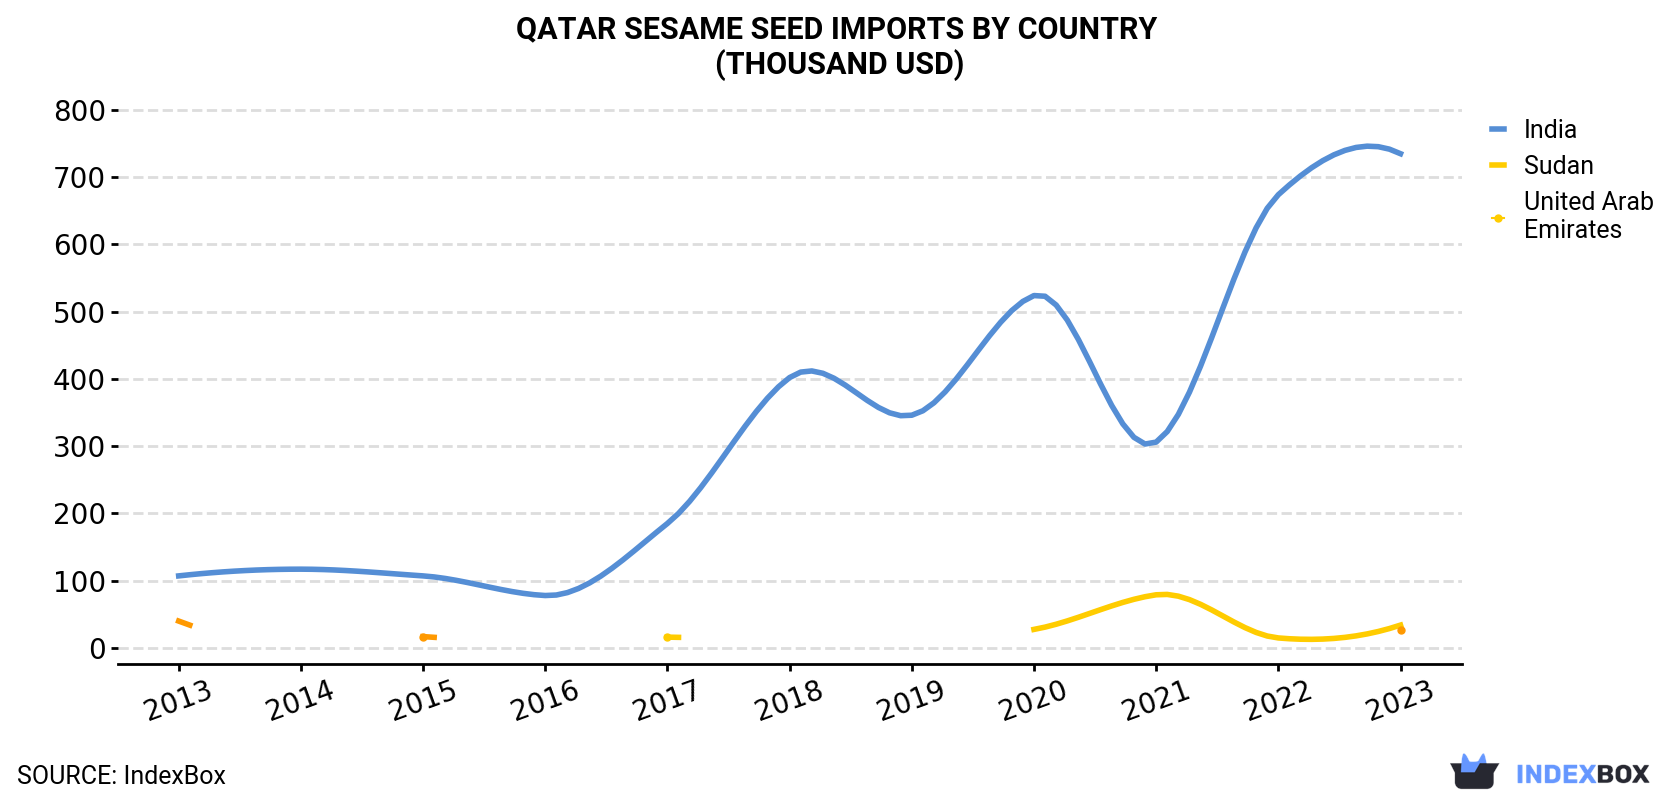 Qatar Sesame Seed Imports By Country (Thousand USD)